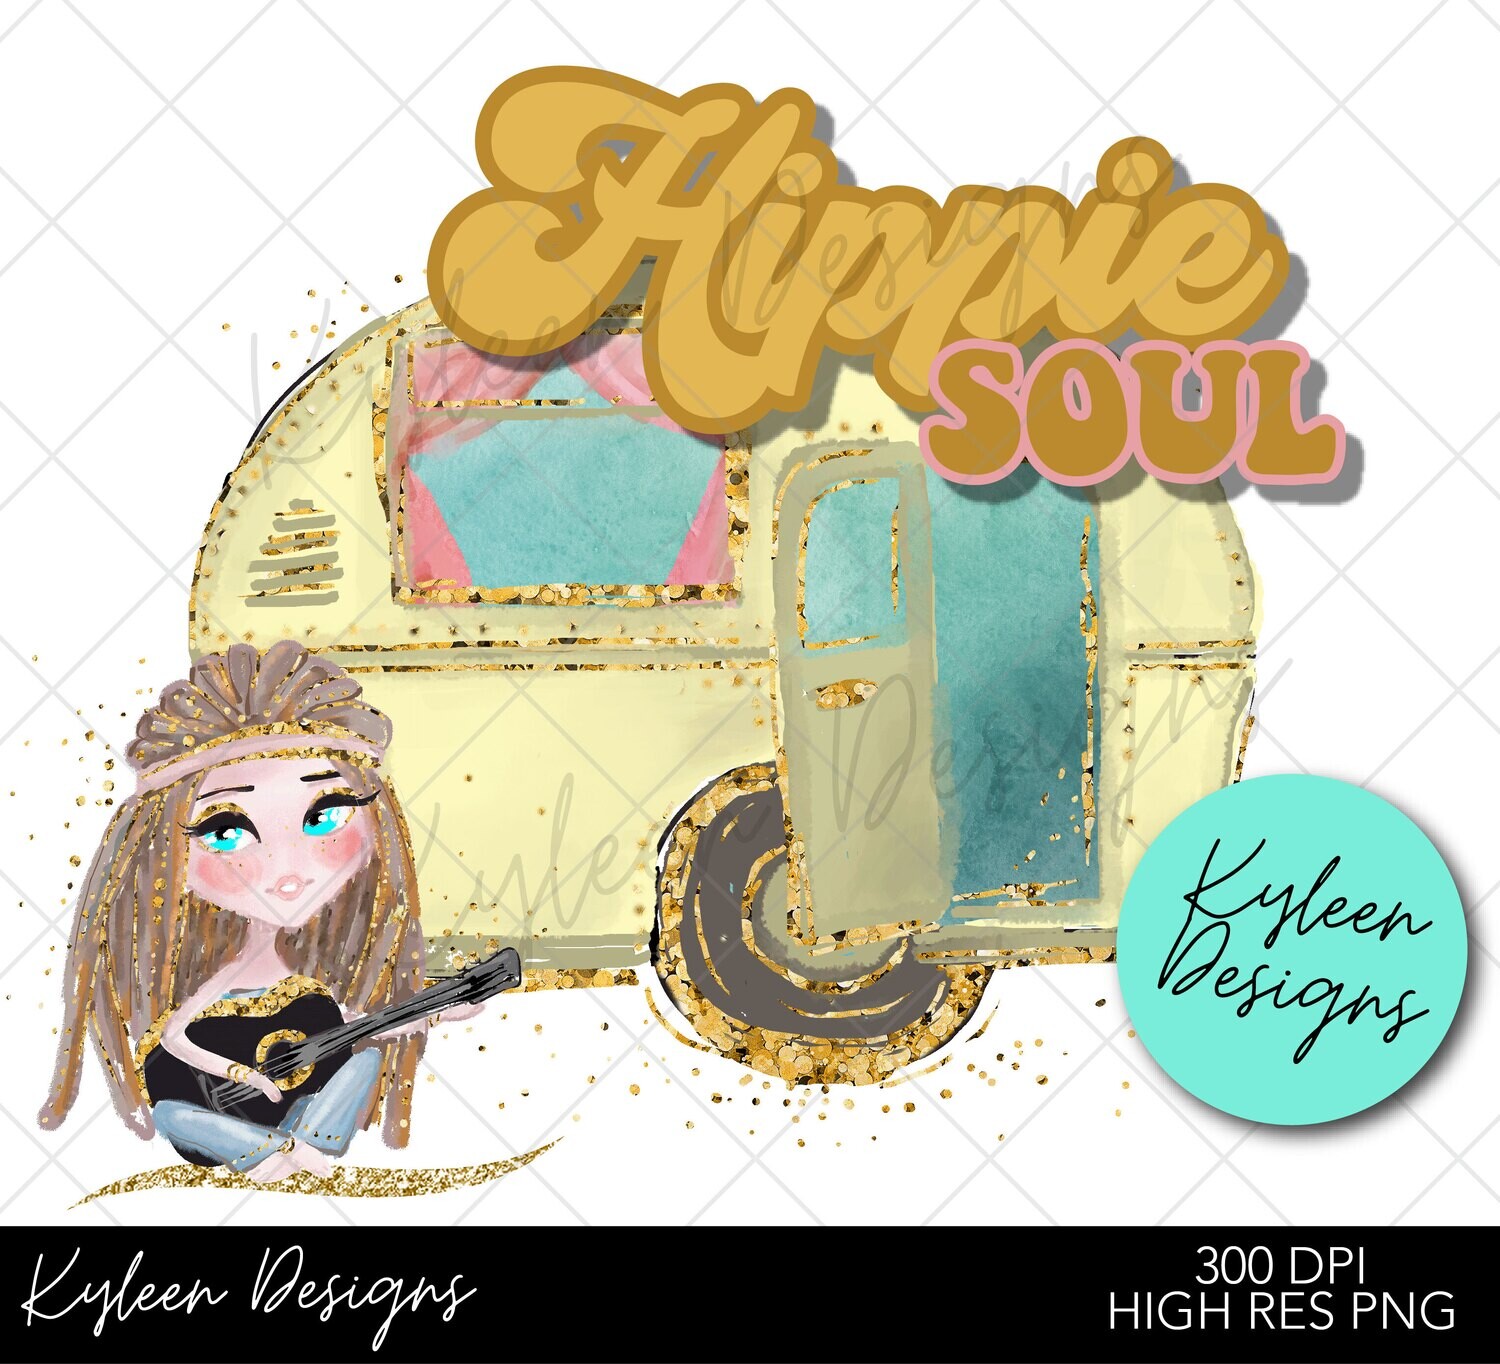 Hippie Soul High Res PNG 300 DPI file